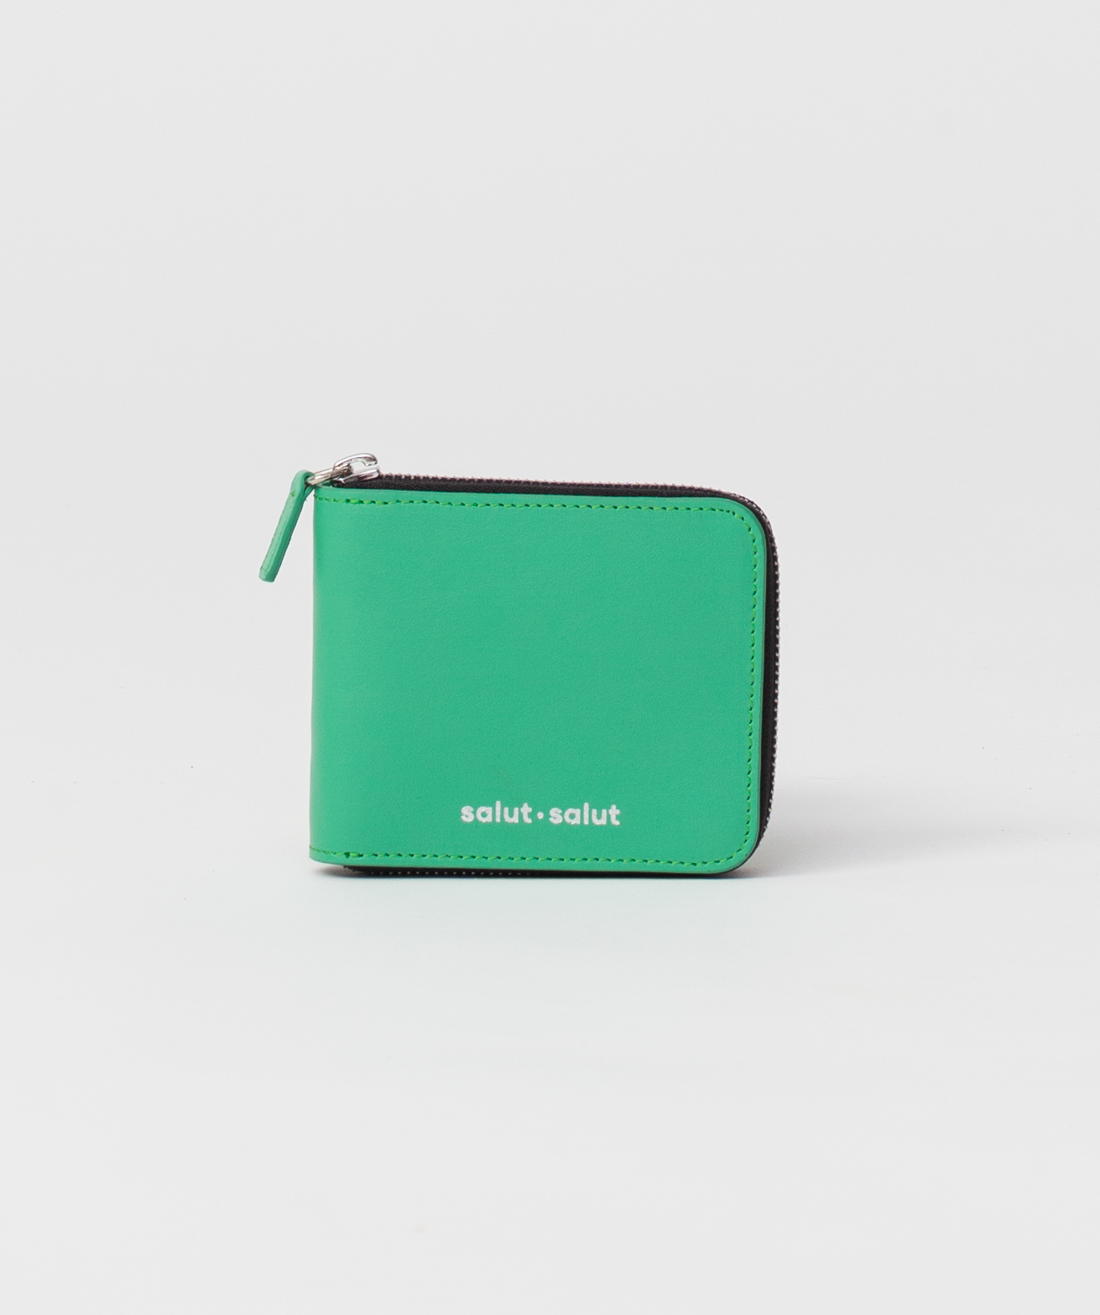 Square Cash - GREEN LEATHER